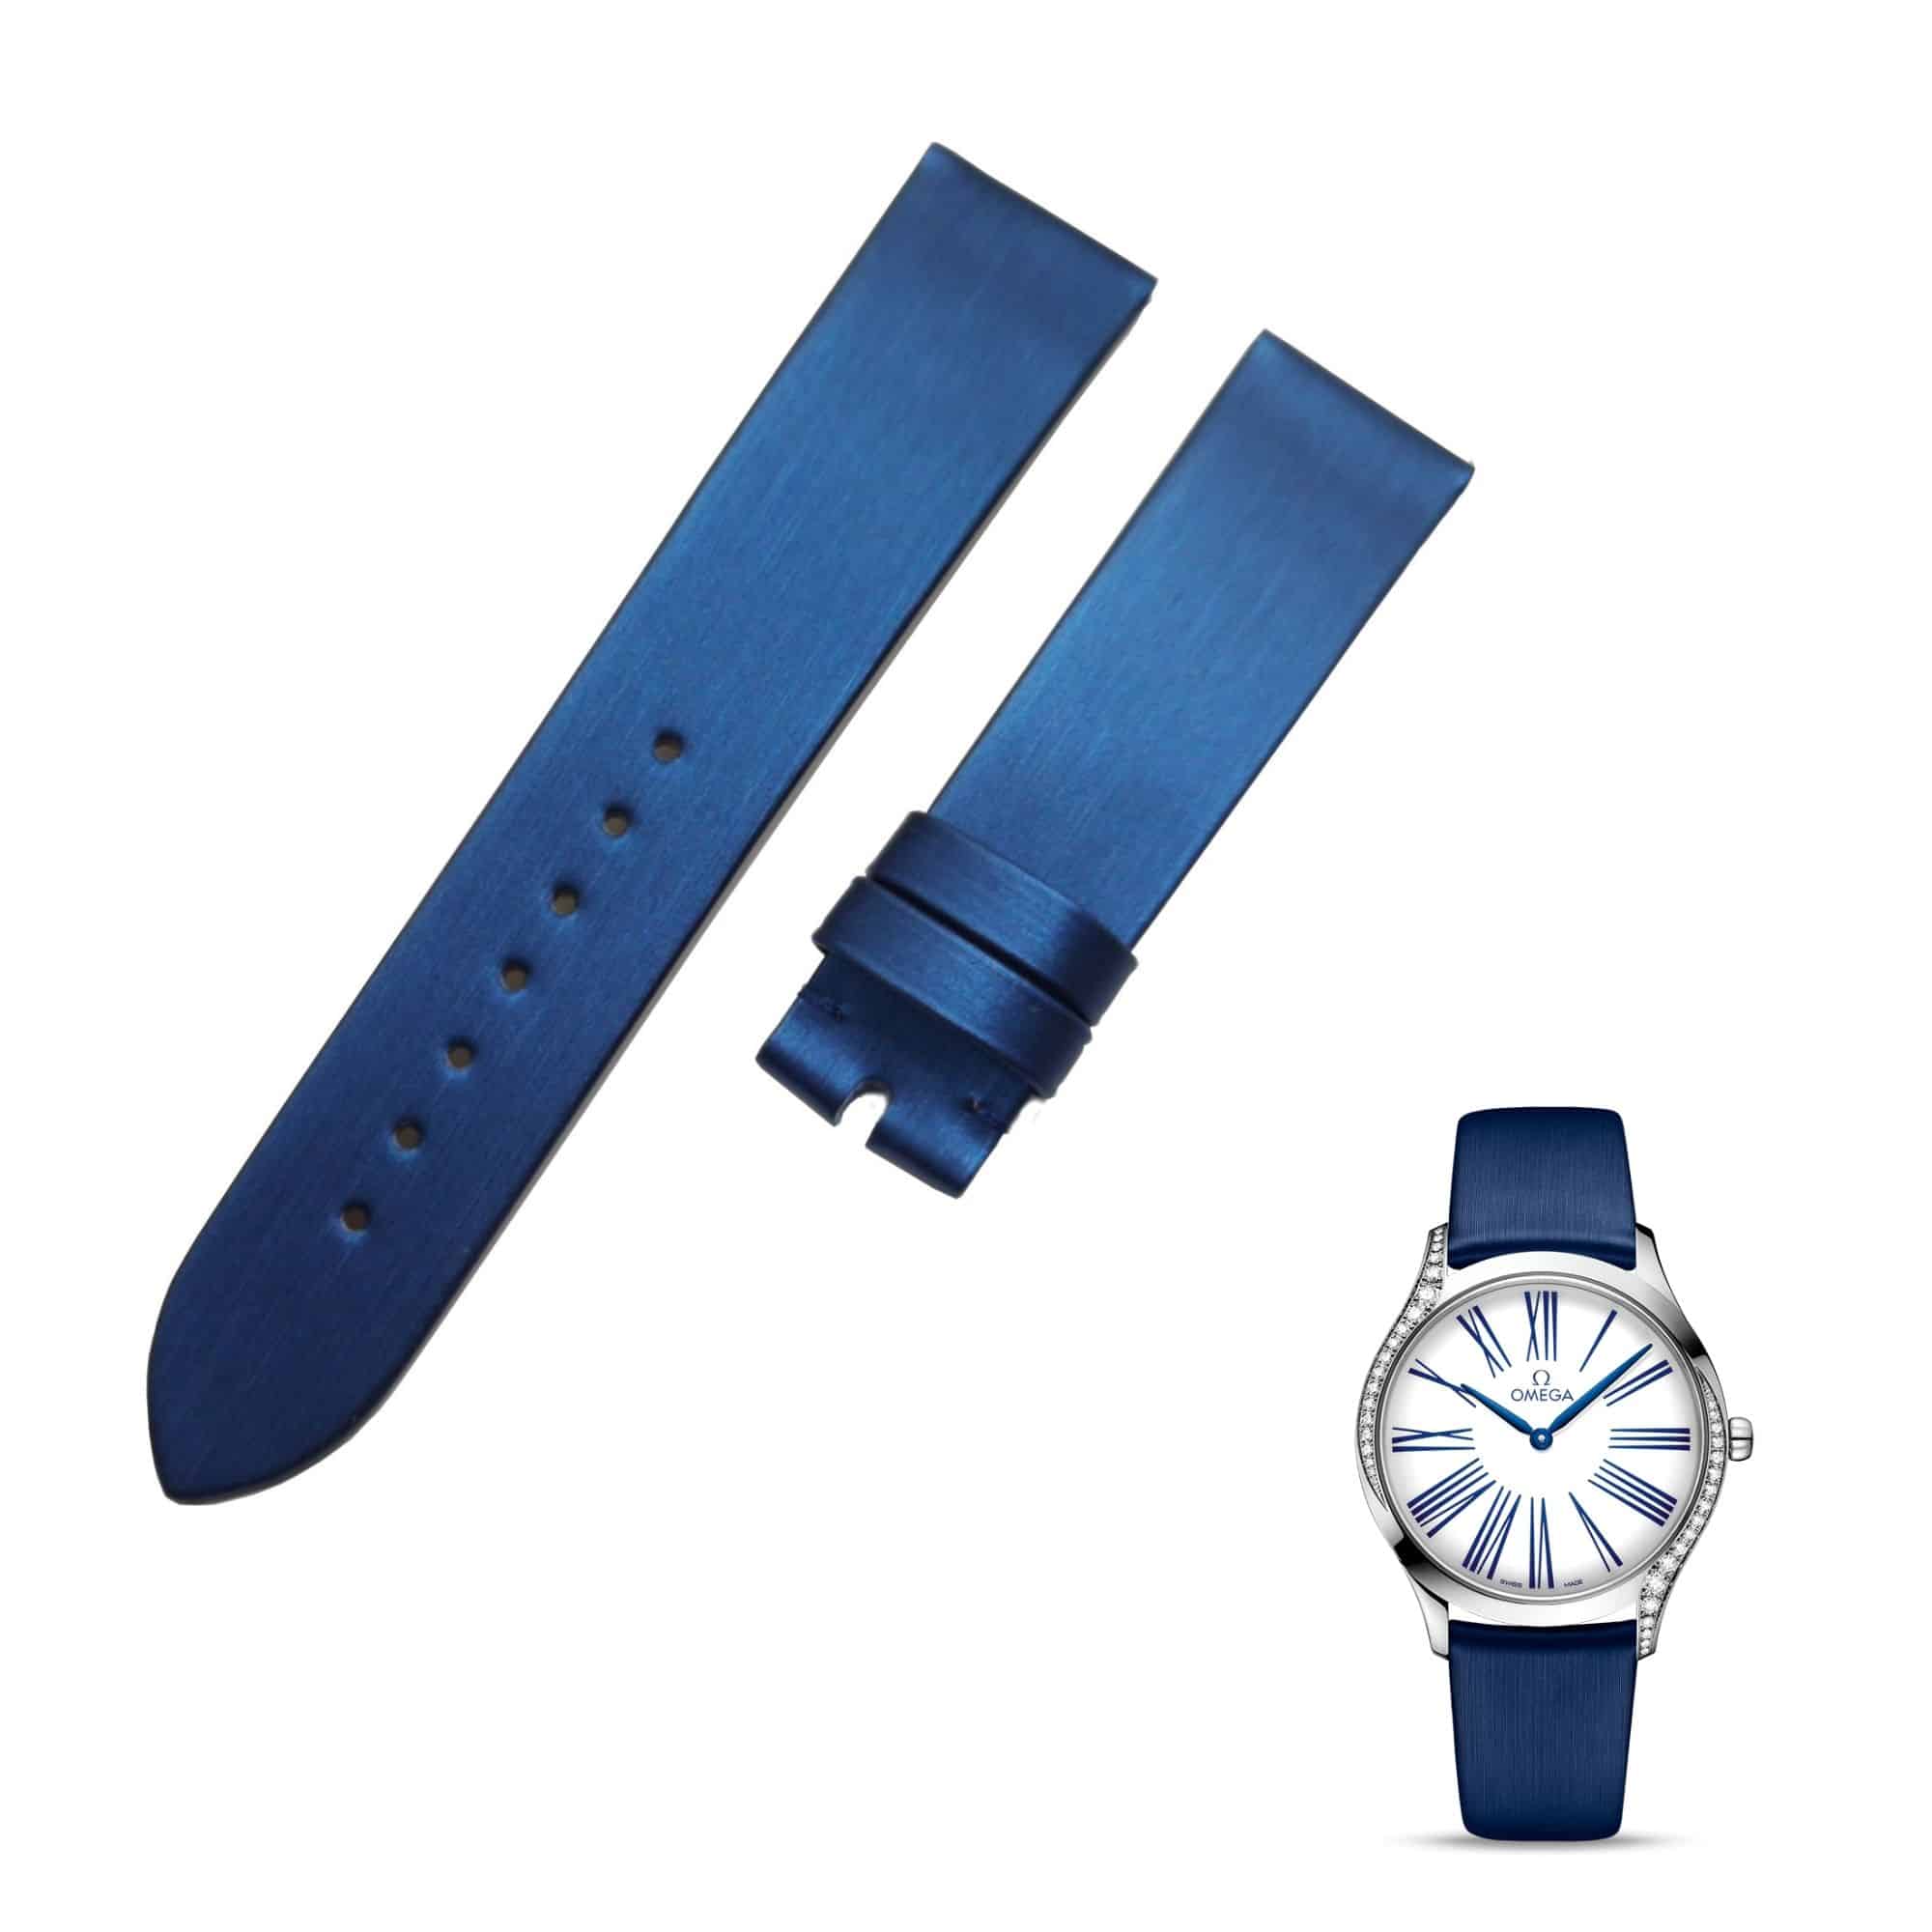 Premium Omega watch straps replacement Omega Deville watch strap blue satin leather watchband online for sale